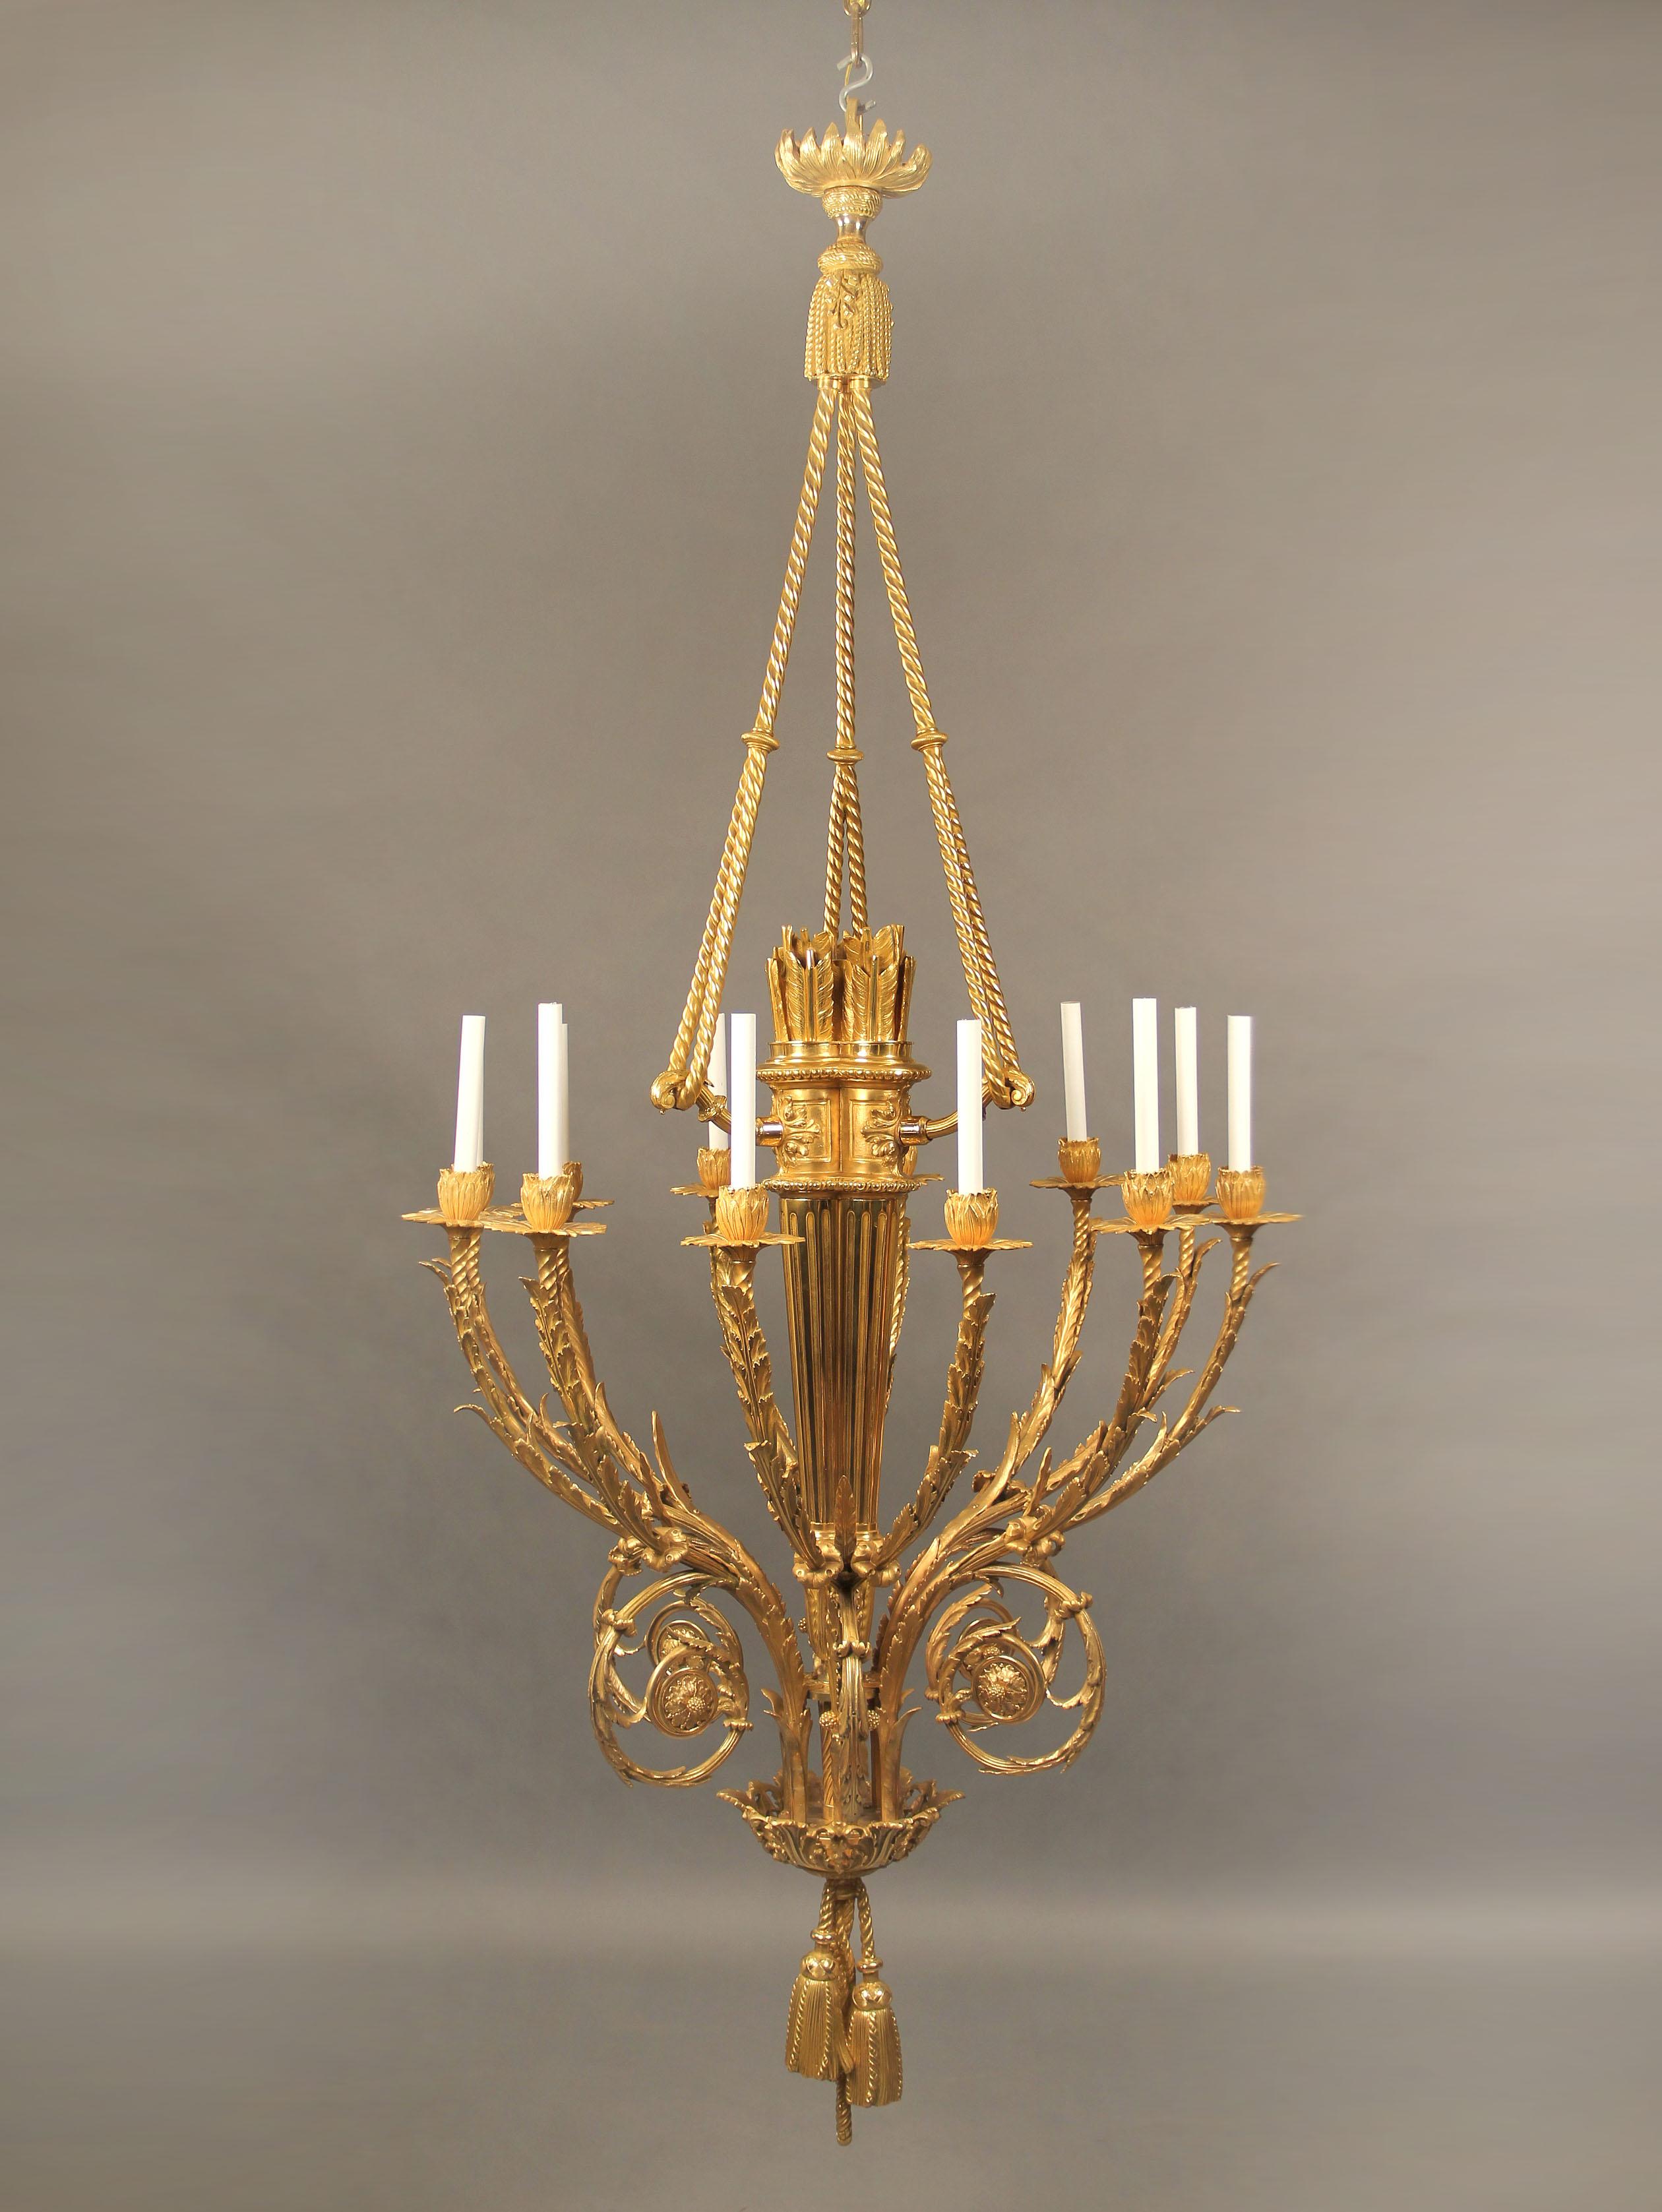 An exceptional late 19th century gilt bronze 12-light chandelier

A fluted tapering central body, 12 rope and foliate candelabrums, five foliate winding scrolls, the central body connected to the canopy by twisted rope and tassel, the chandelier